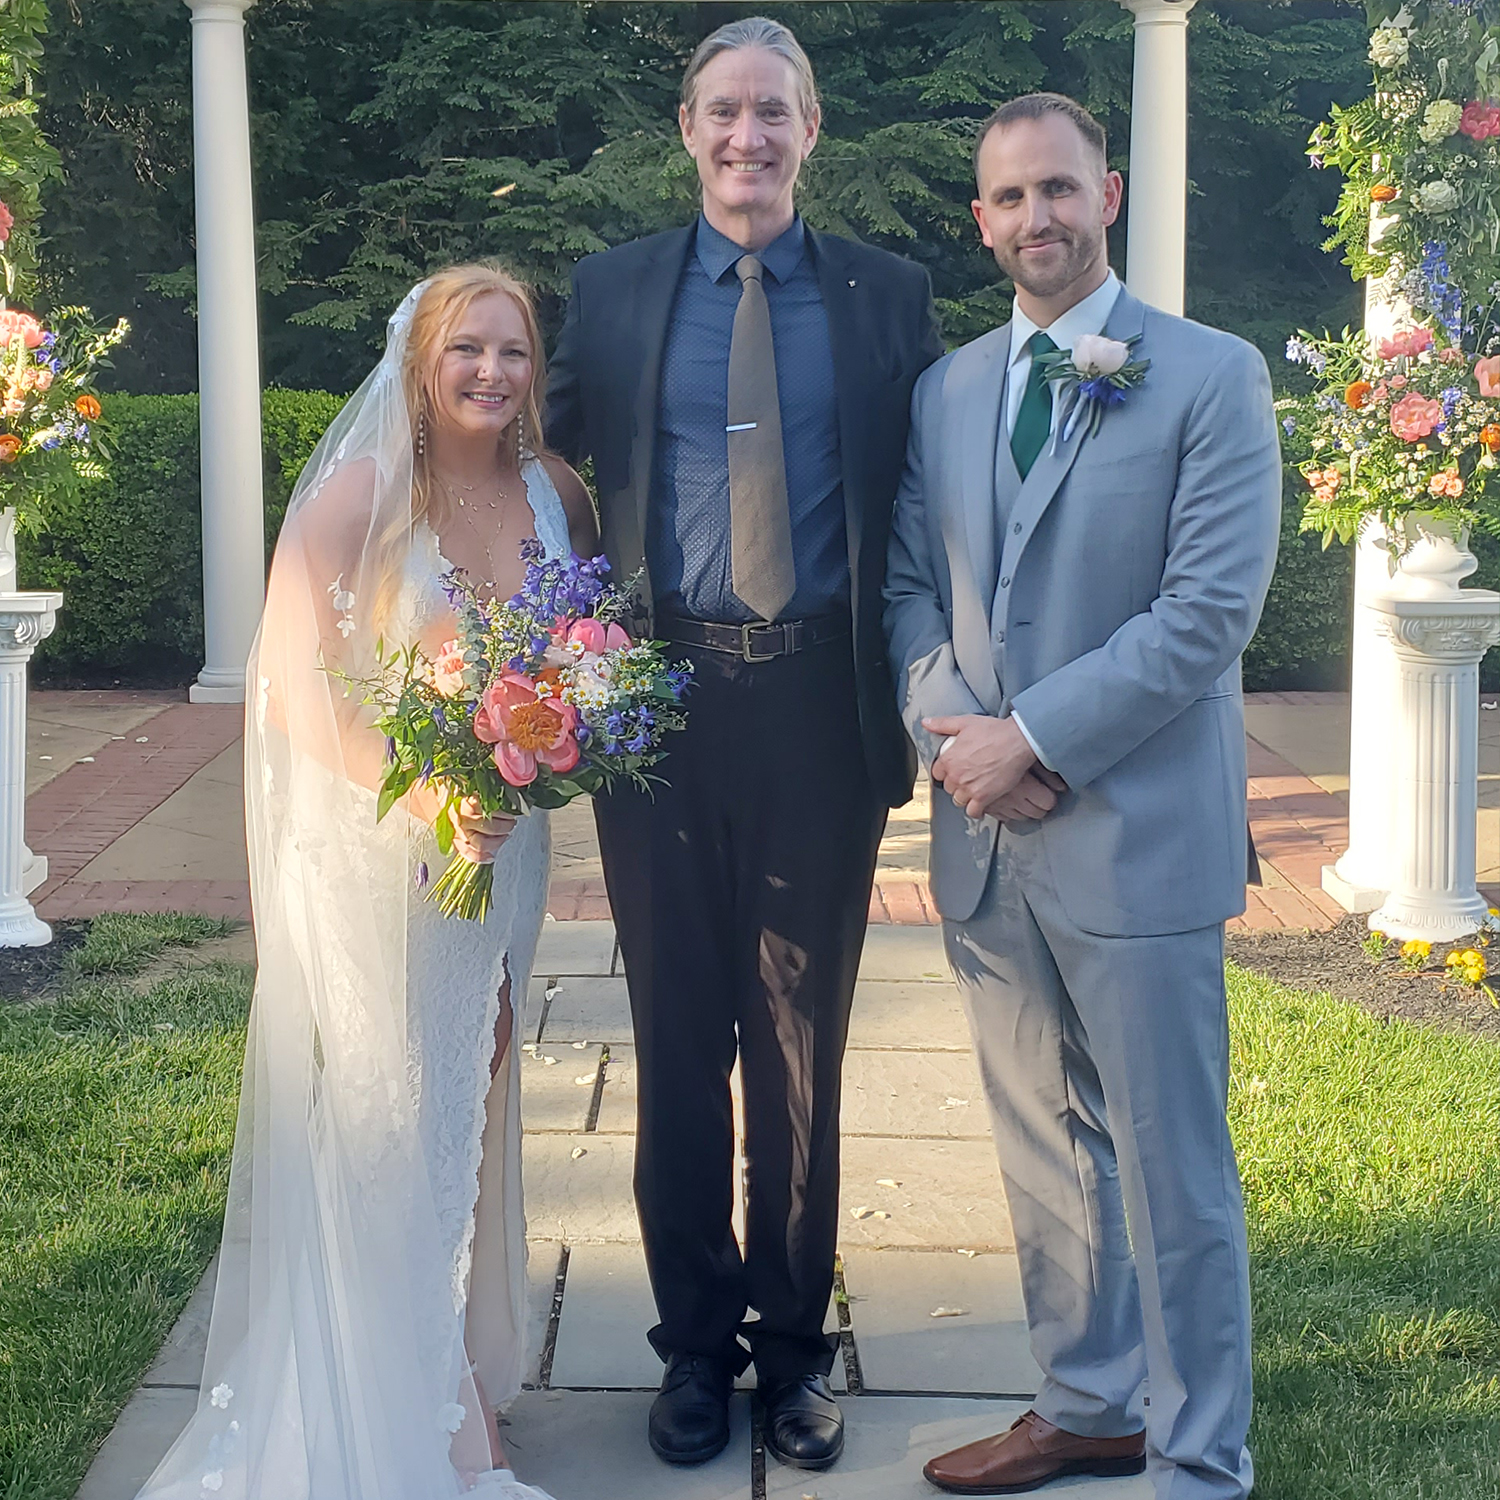 Knowlton Mansion Officiant: Leah and Ryan